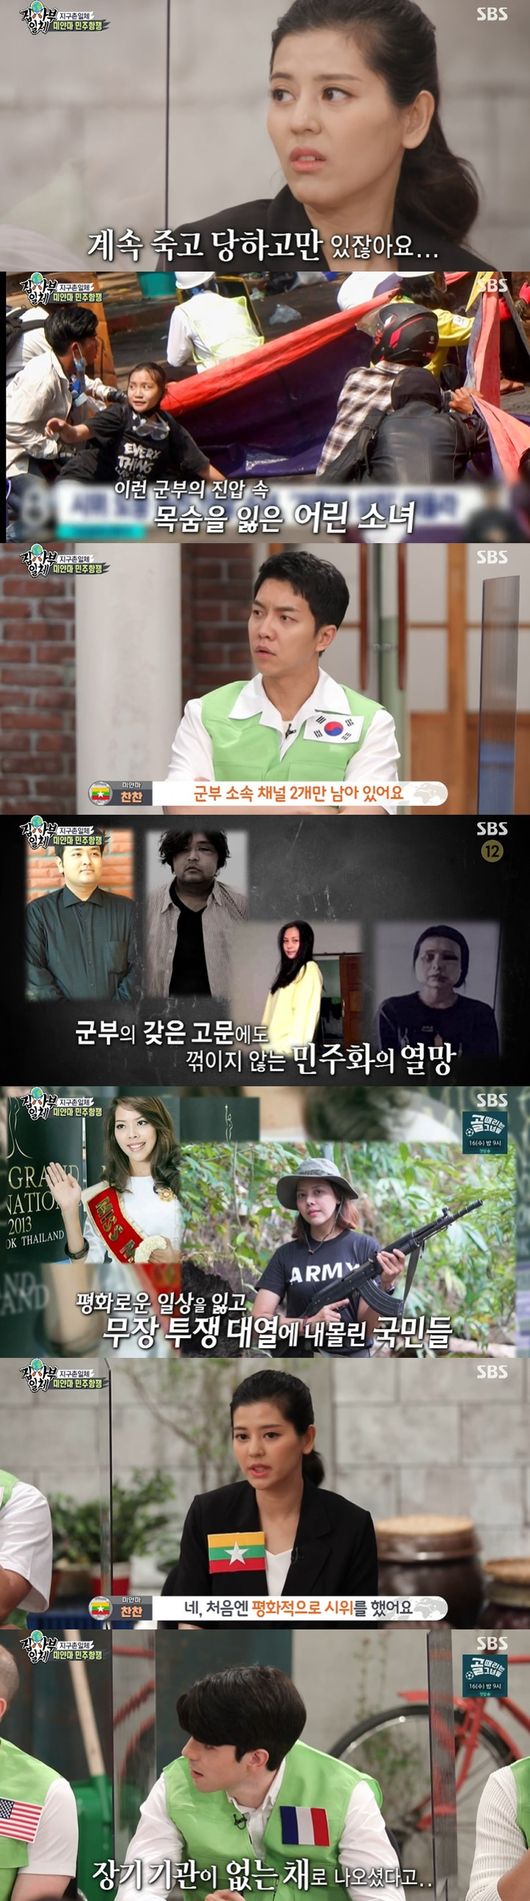 Chan Chan, who appeared as a representative of Myanmar, criticized the Myanmar military coup and appealed for the need for urgent help from all over the world, referring to the Global Village issue in All The Butlers.On the 6th, SBS entertainment All The Butlers, the district youth association got on the air.On this day, I first learned about retaliatory consumption in the feature of the Global Youth Association. Corona 19 was blocking the world trip and was releasing the psychology suppressed by stress.I have looked into the consumer culture of each country. As the delivery culture in Korea is famous, it is developing in Europe.Robin said, Now, online shopping and delivery culture are possible. I was surprised to hear that drone delivery is now being commercialized.Yang Se-hyeong asked about stocks, questions about investment, and issues that stocks are essential or not.Tyler, Alberto Fujimori and Yang Se-hyeong said stocks are essential, and Kim Dong-Hyun expressed opposition to a fearful fluctuation for beginners, hard to hold.Tyler said, Introduction to stocks is essential, but I have to study the company, but there is a book called wise investor rather than that.I talked about Tokyo Olympic Games as the next issue.Corona 19 discussed the possibility of holding Doco Olympic Games, conveying the situation in which the first Olympic Games were postponed for the first time ever.Speaking on the phone with Professor Hosaka Yuji regarding Tokyo Olympic Games, he said, The Corona 19 is a serious situation.It is the fourth trend since last winter, and as of mid-May, about 6,000 confirmed people a day. Alberto Fujimori also said that the symbolic meaning of the players lifelong goals and all-time goals is important, and that the Olympic Games should be held, and Tyler also said that Corona will not be finished in a year or two, and we need to find an Olympic Games operation method for the Pendemic era.As the last issue keyword, I mentioned Myanmar.Citizens are fighting for Min-Juism due to the outbreak of the military coup, and it is a sad situation that the casualties are continuing to increase.As a representative of Myanmar, Chan Chan visited and told the situation that he was being overpowered by the Myanmar military indiscriminately, not for the purpose of suppressing the protesters.It is a violent violence that has already disappeared. Chan Chan criticized the top commander of Aung Hlaing, saying that it is because of power greed referring to military dictatorship.We cannot continue peacefully; the citizens of Myanmar are also fighting armed struggles with Min-Ju forces to counter the military, Chan Chan said.Chan Chan said, I need so much external power. He said, I voiced my voice to Myanmar military in my personal broadcasting and blacklisted me.Chan Chan said, I have to protect my parents, but I am sorry I can not do it. I feel guilty because I feel like I live here well.Chan Chan said, The revolution will be done, I hope everyone will be strong.Lee Seung-gi said, The sacrifice for Min-Ju is really great, so is Gwangju. He made everyone feel better by delivering the noble sacrifice of Min-Ju uprising.Above all, I once again asked for the international community to help me quell the Myanmar Coup.On the other hand, in the trailer, All The Butlers members were drawn to Ulleungdo,Shin Seong-rok was seen joining the group.All The Butlers broadcast screen capture